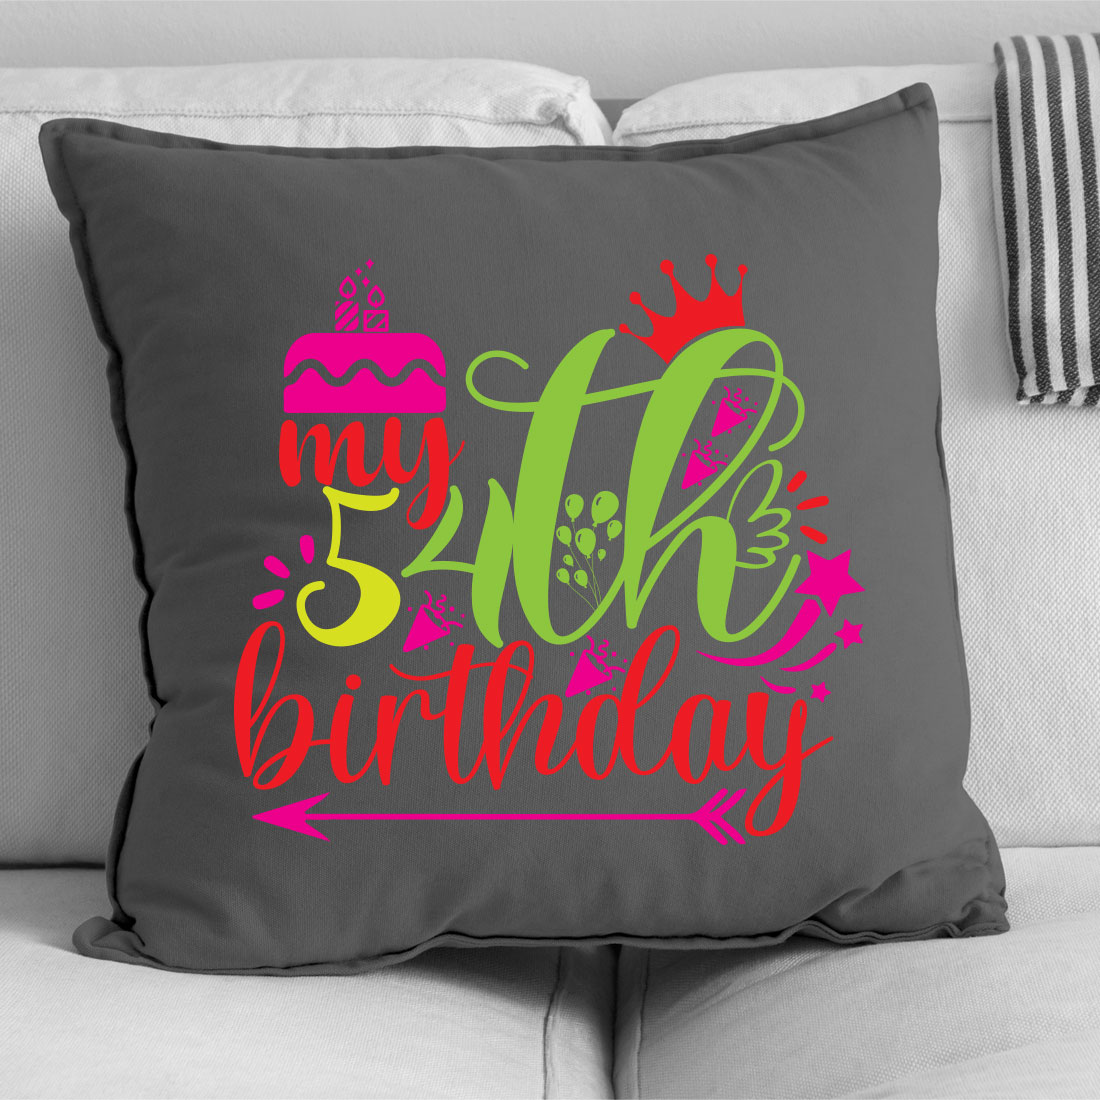 Pillow with a birthday design on it.